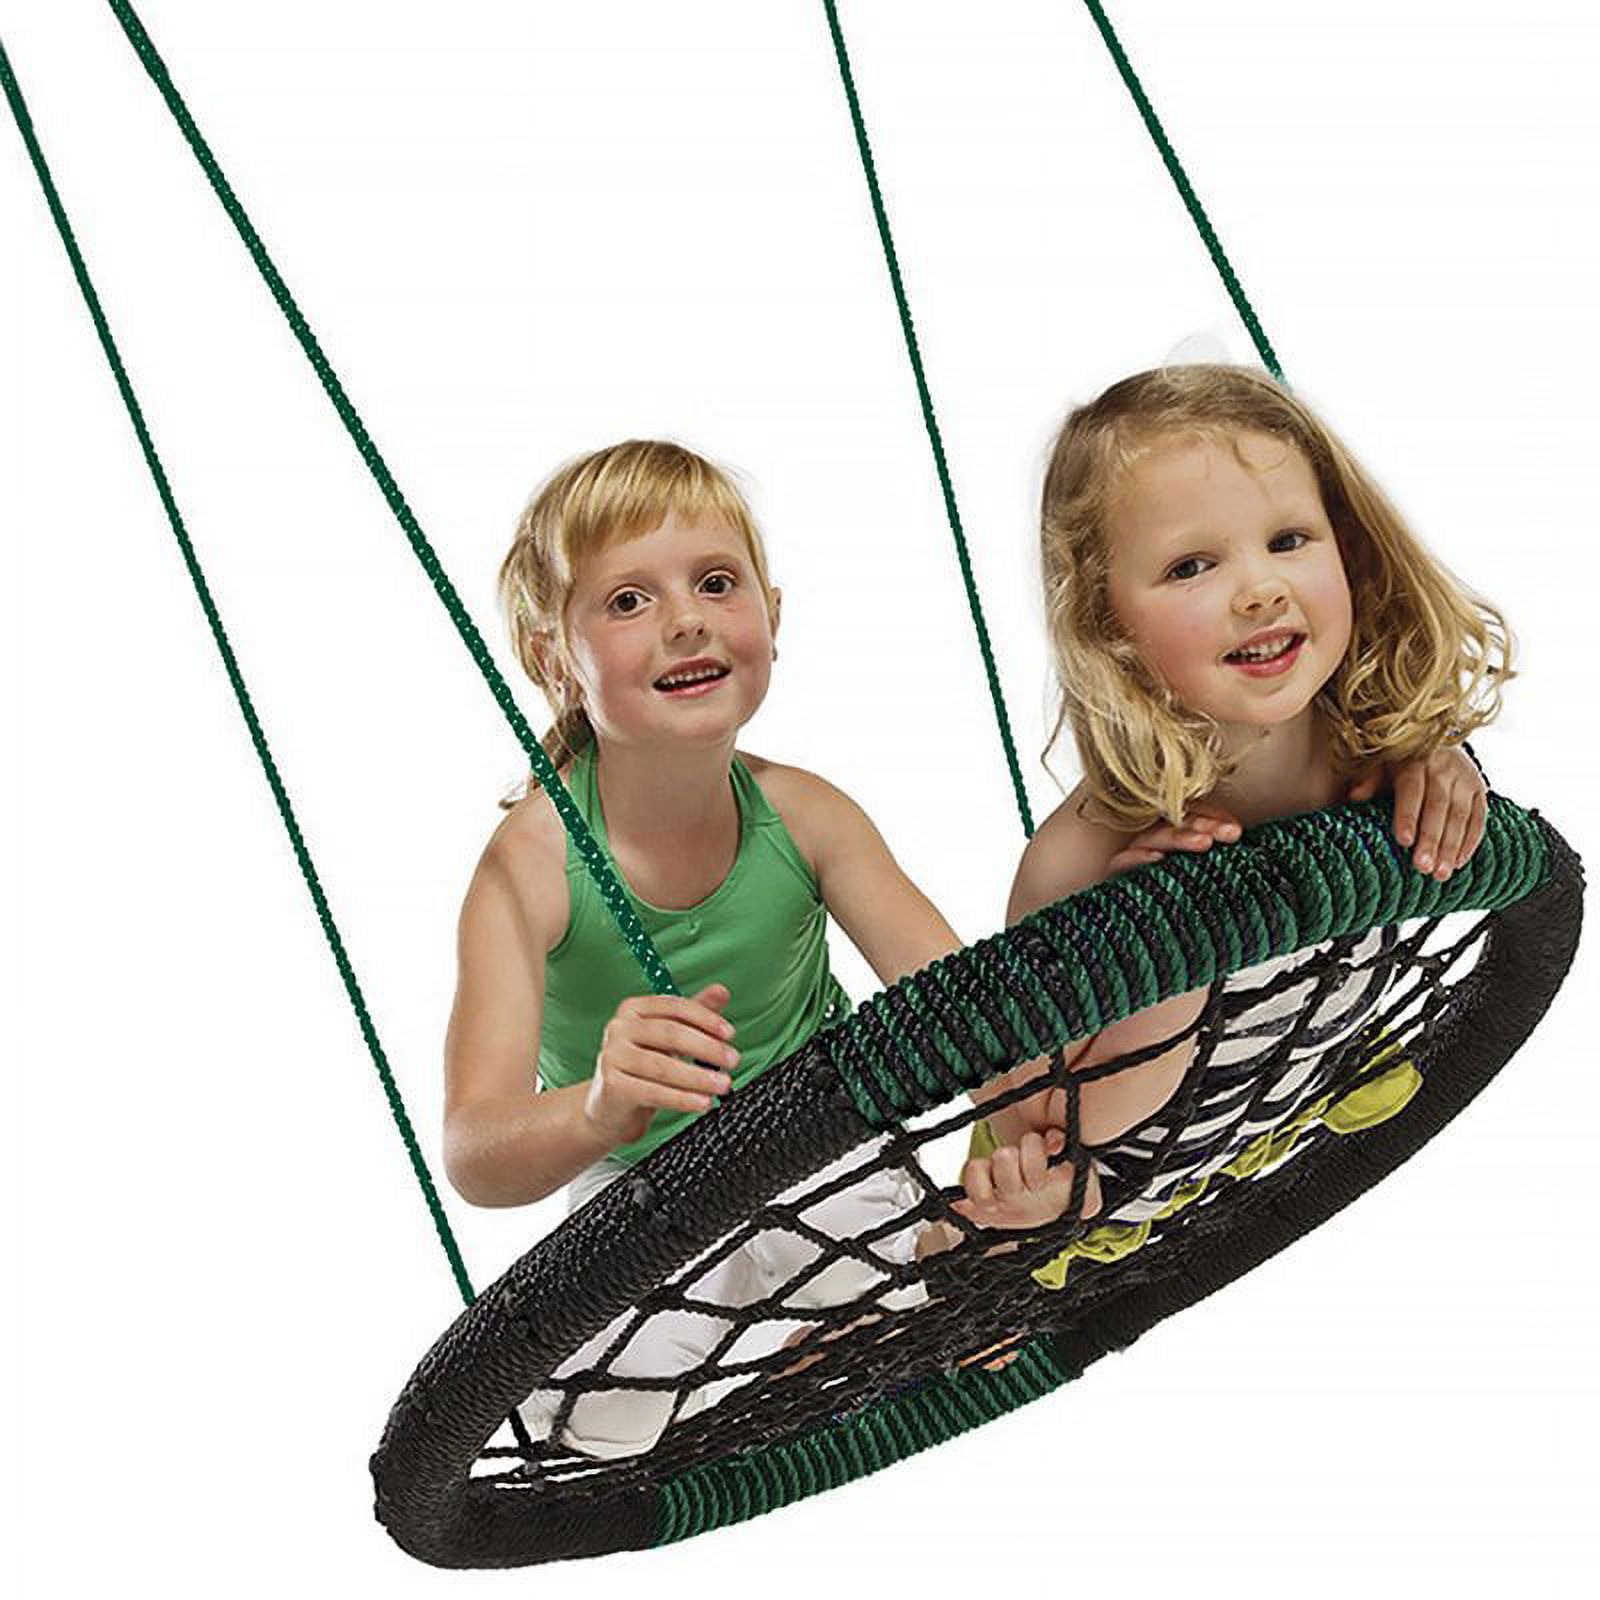 Swing-N-Slide Monster Web Swing with Green and Black Nylon Ropes - image 1 of 6